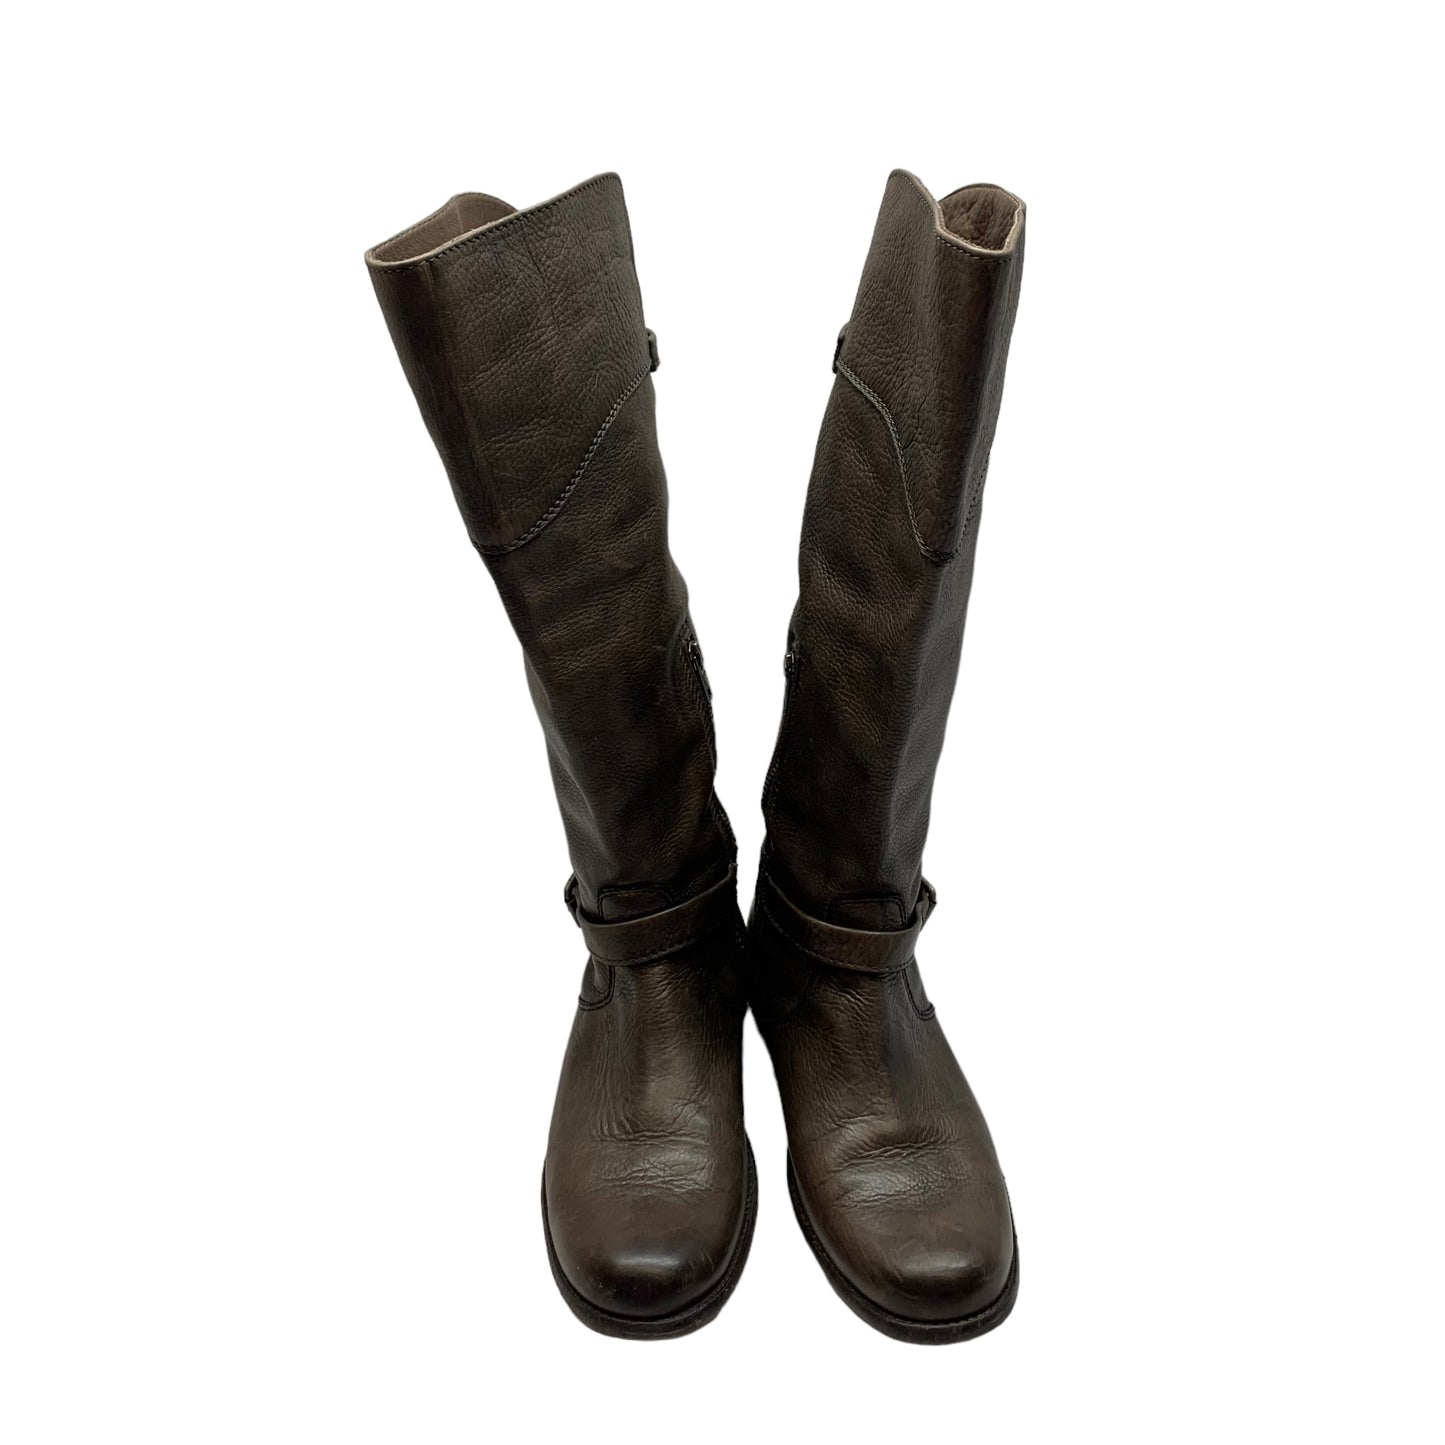 Boots Designer By Frye  Size: 9.5